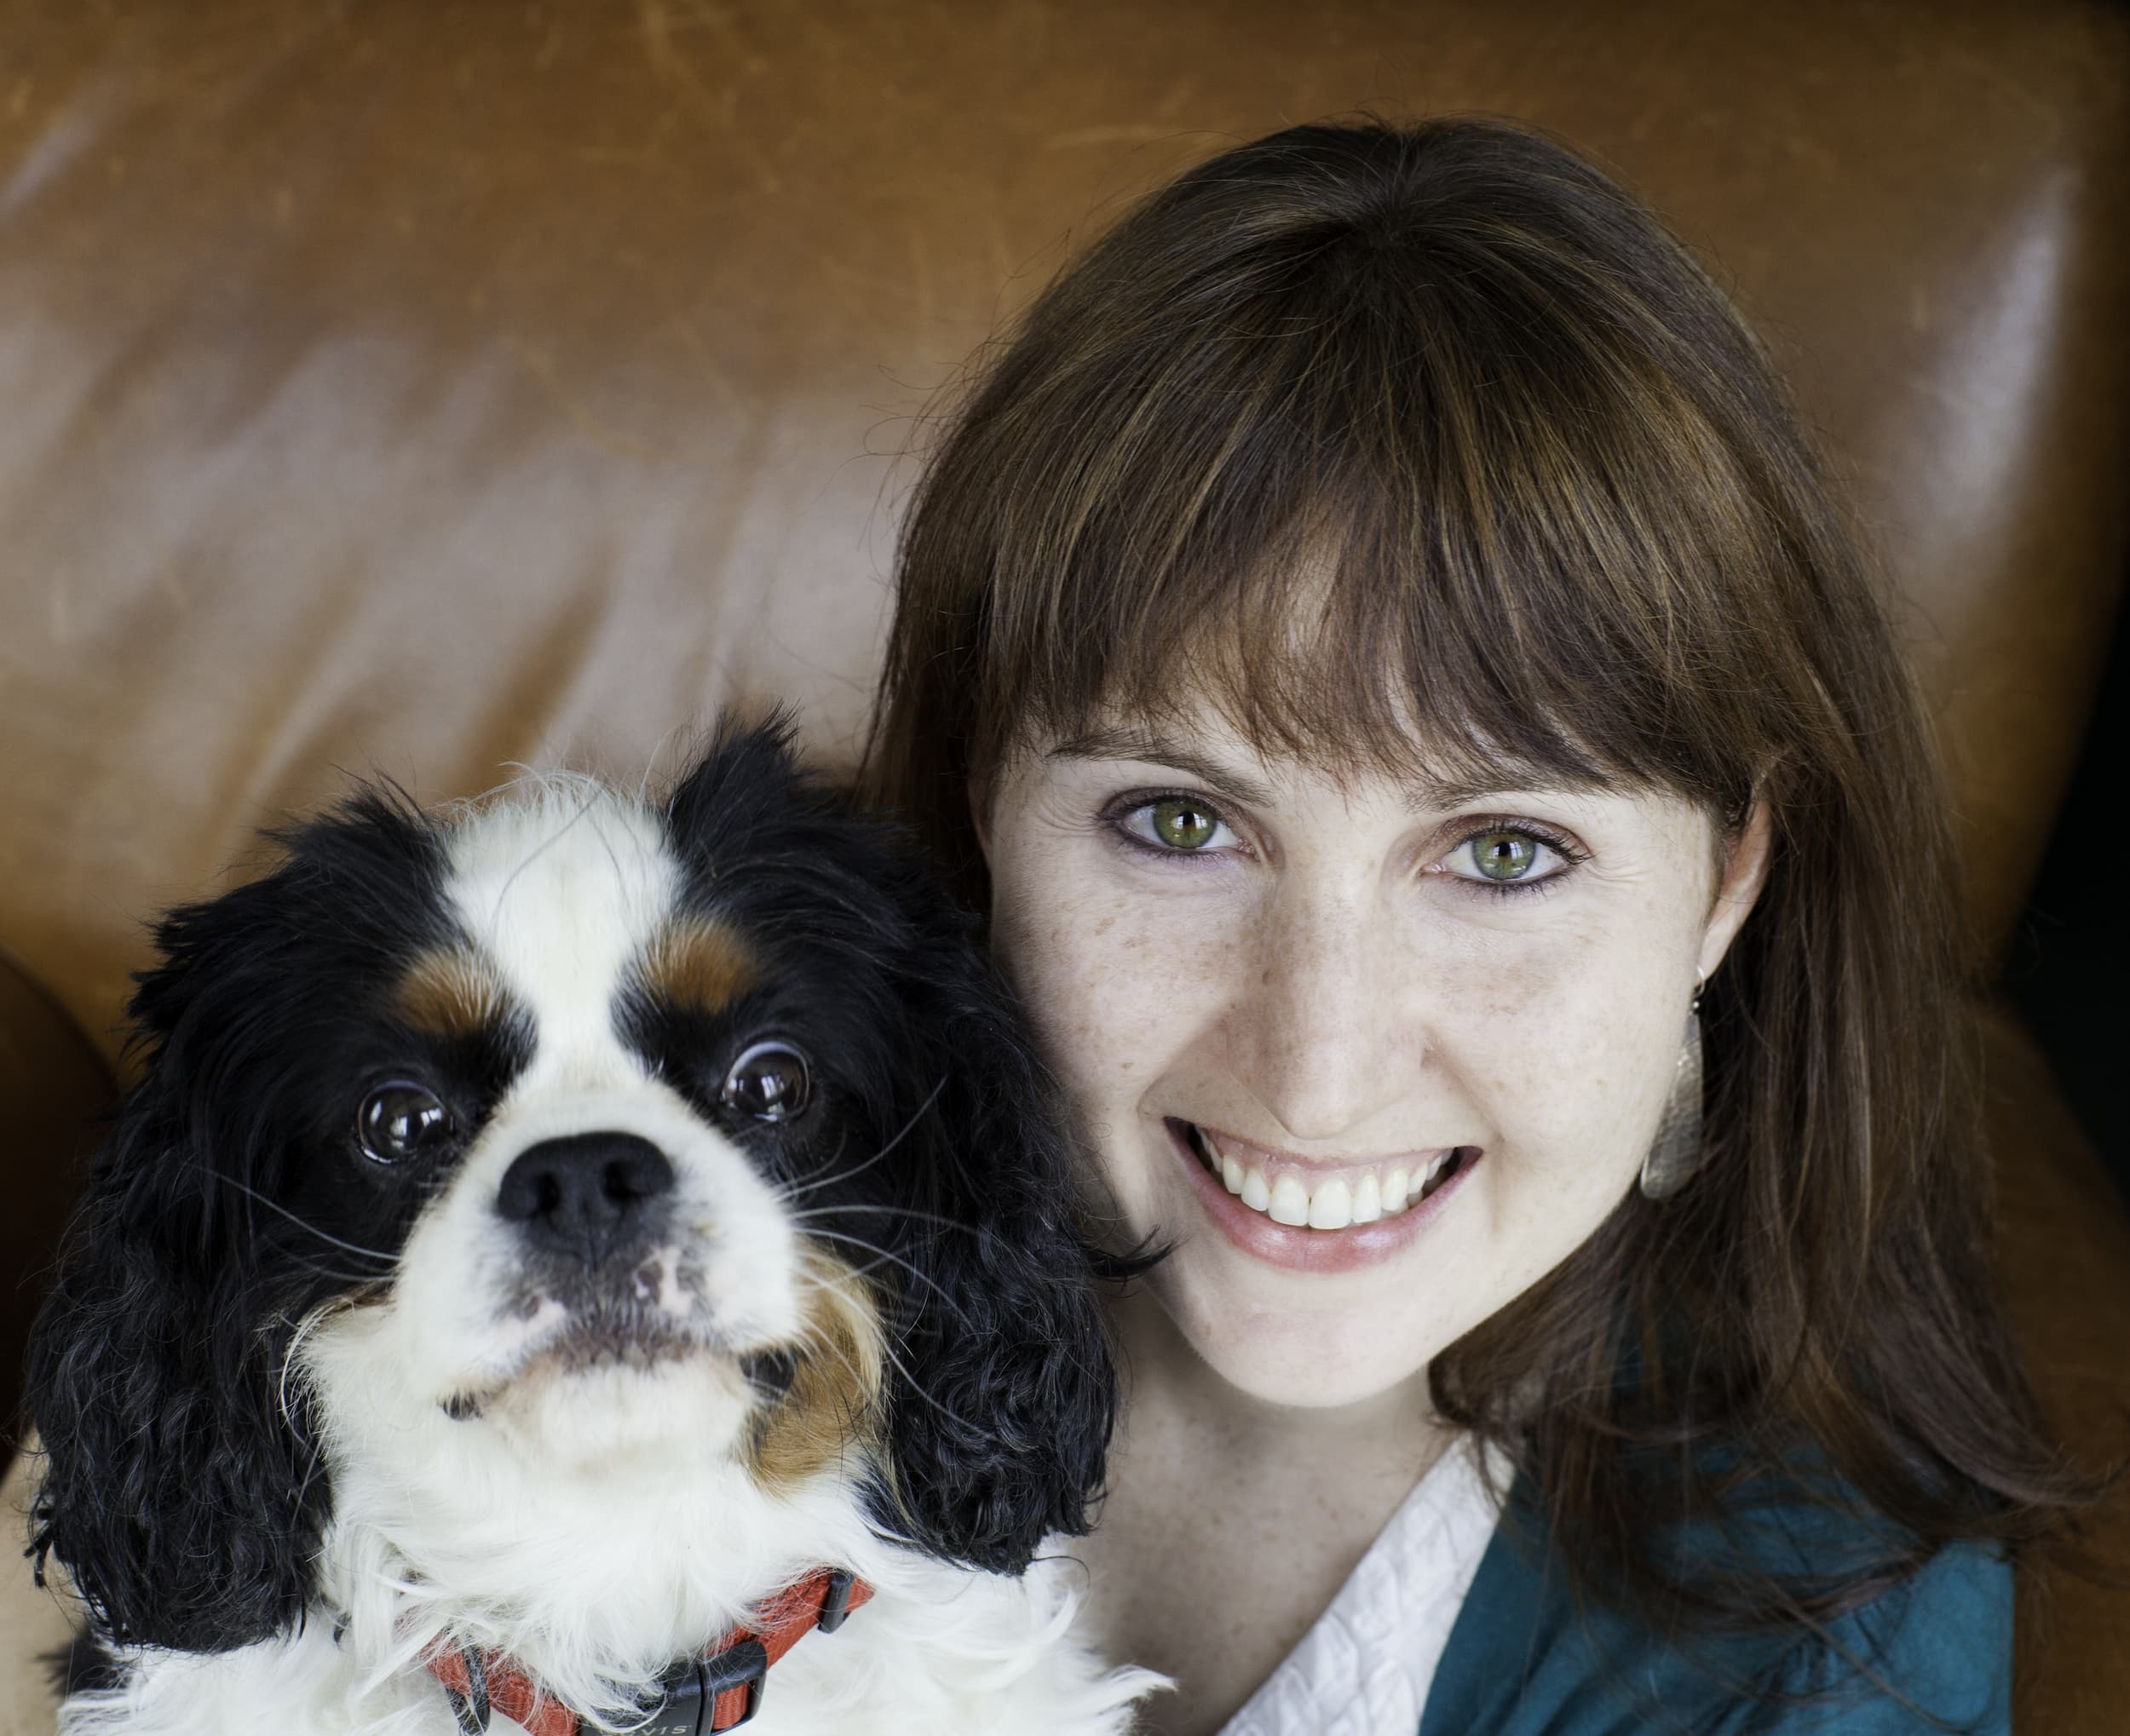 Author Emily Anthes and dog